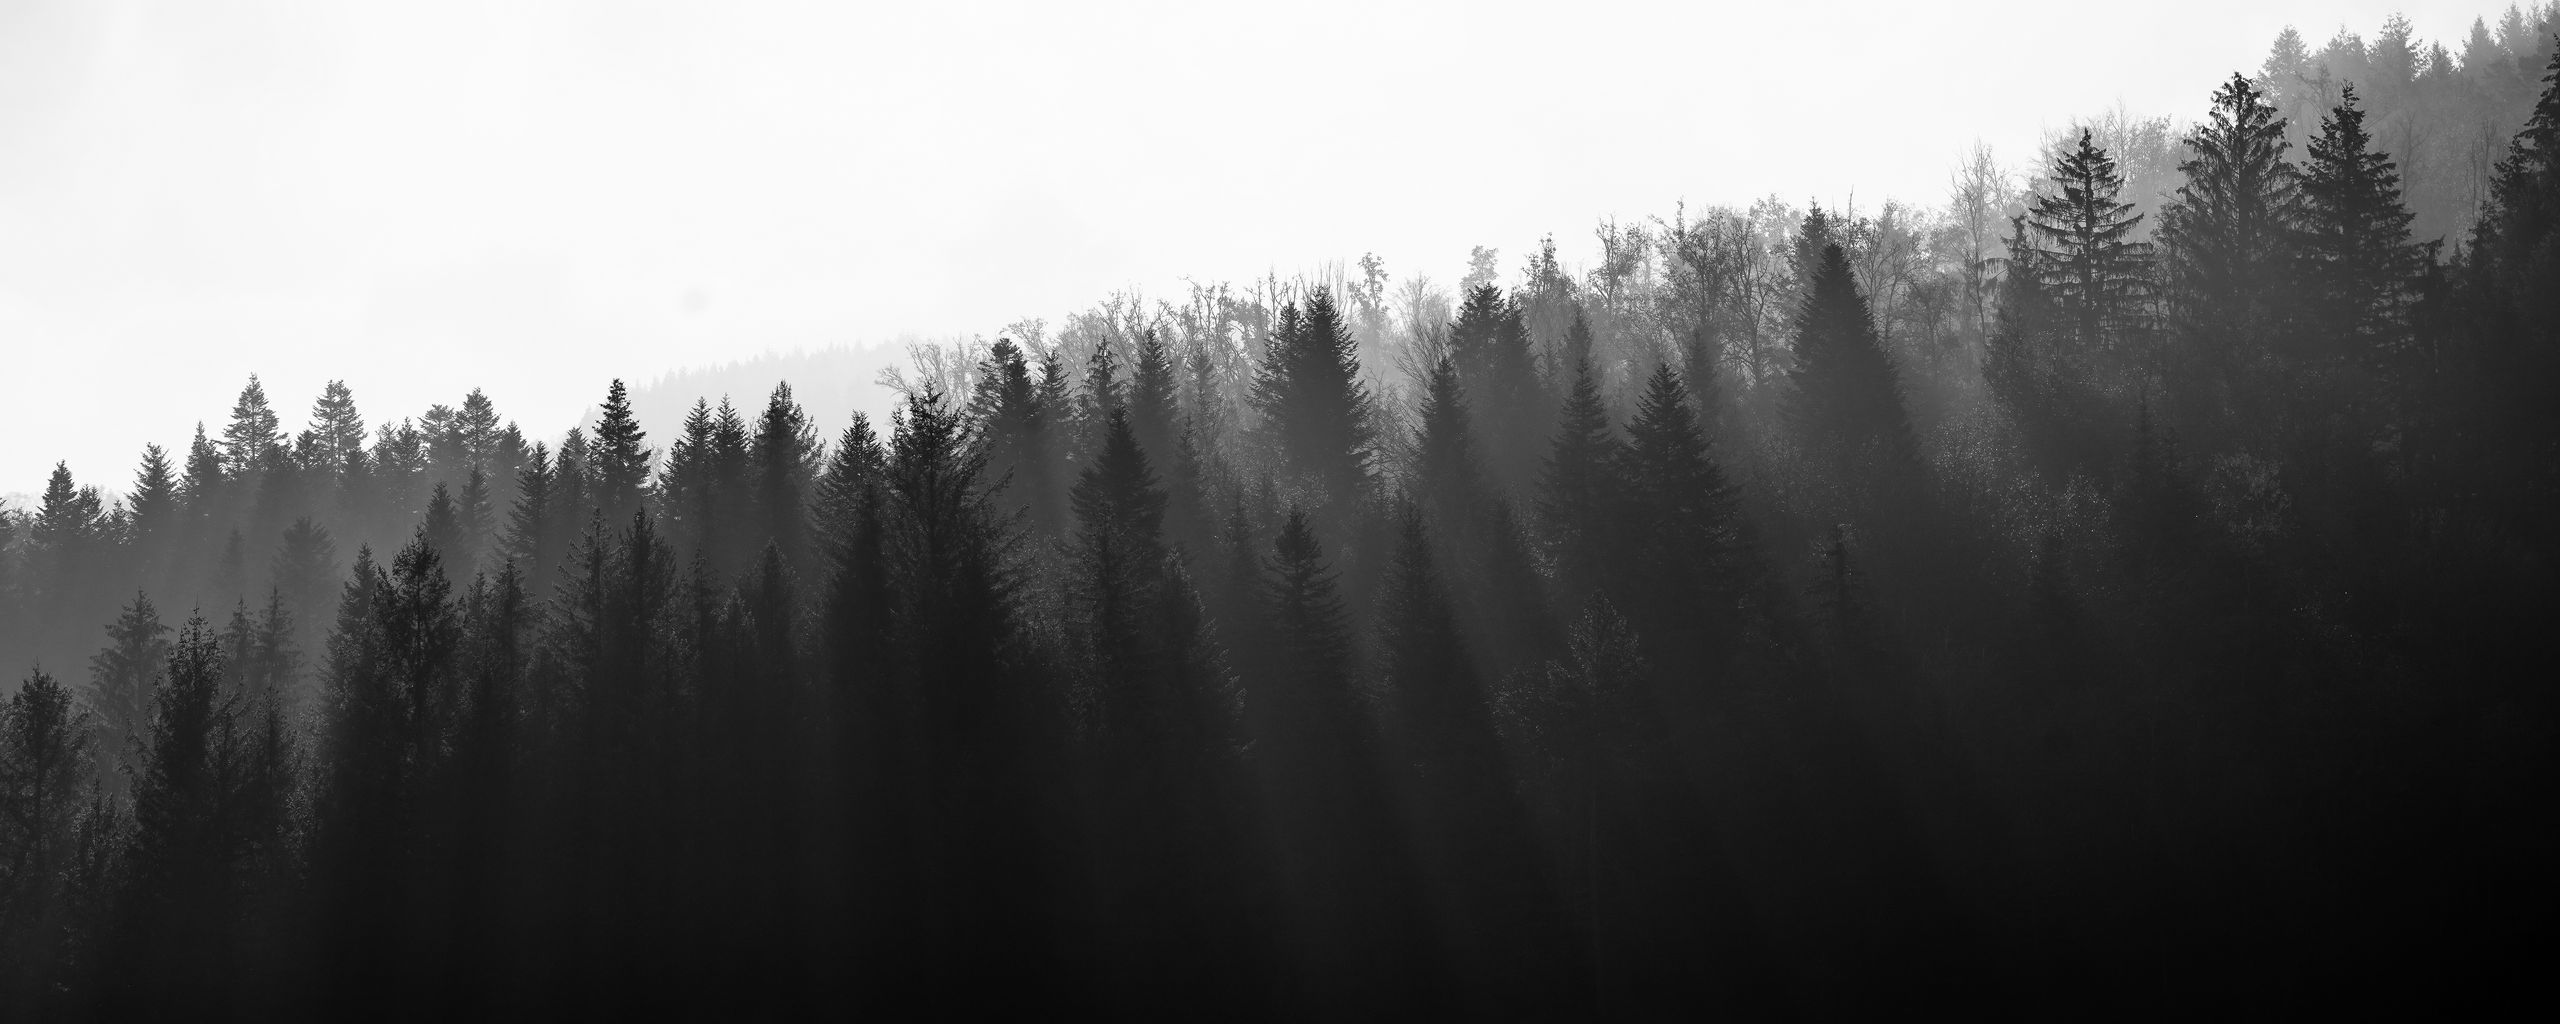 Download wallpaper 2560x1024 forest, trees, light, black and white ...